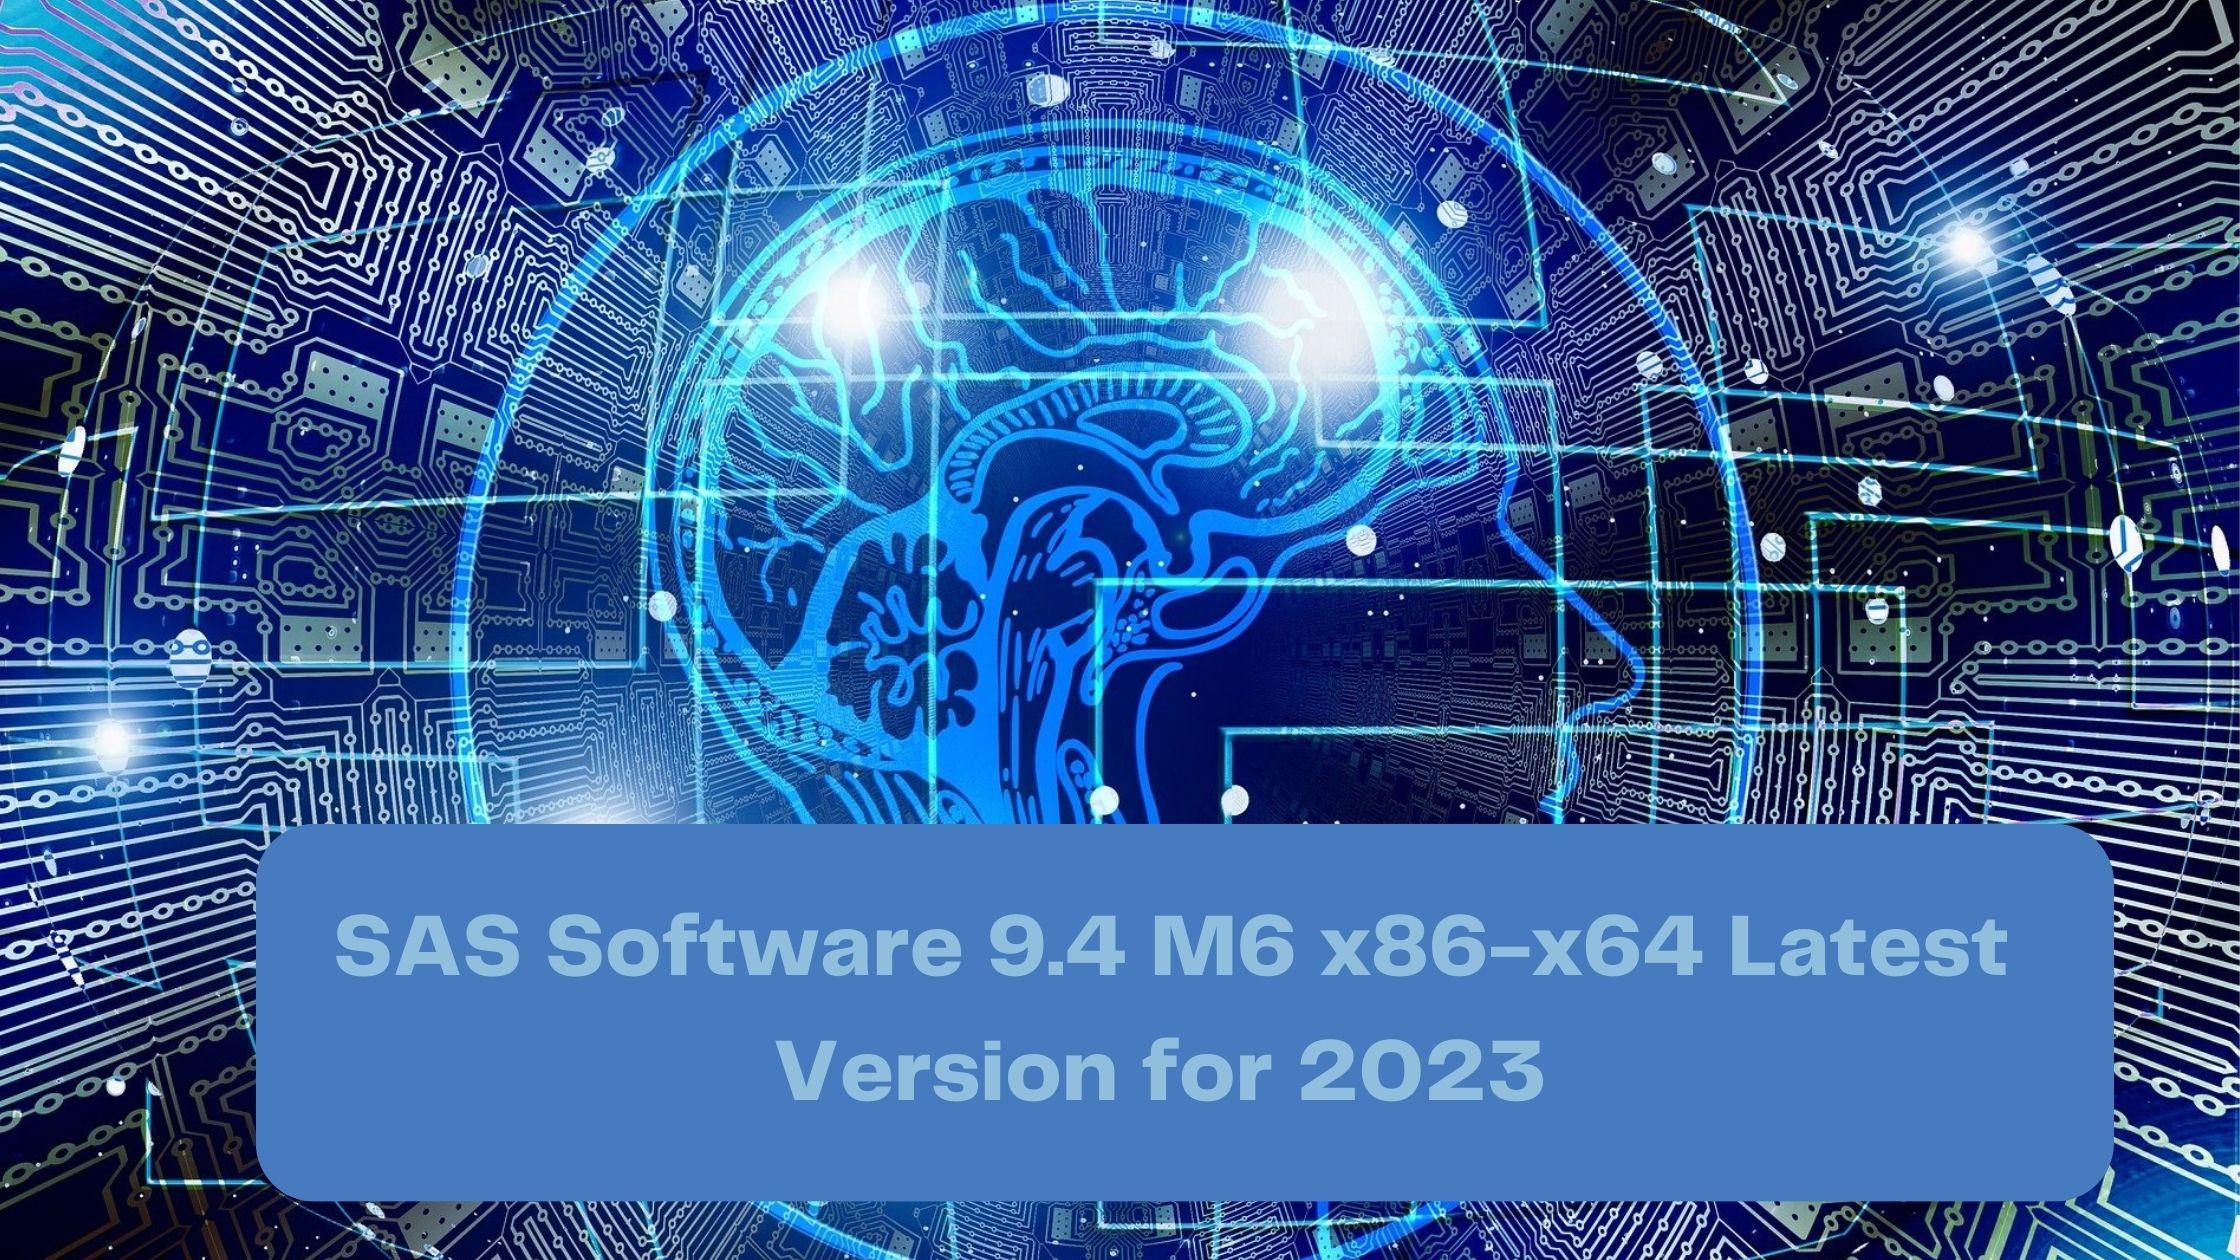 SAS Software 9.4 M6 x86-x64 Latest Version for 2023